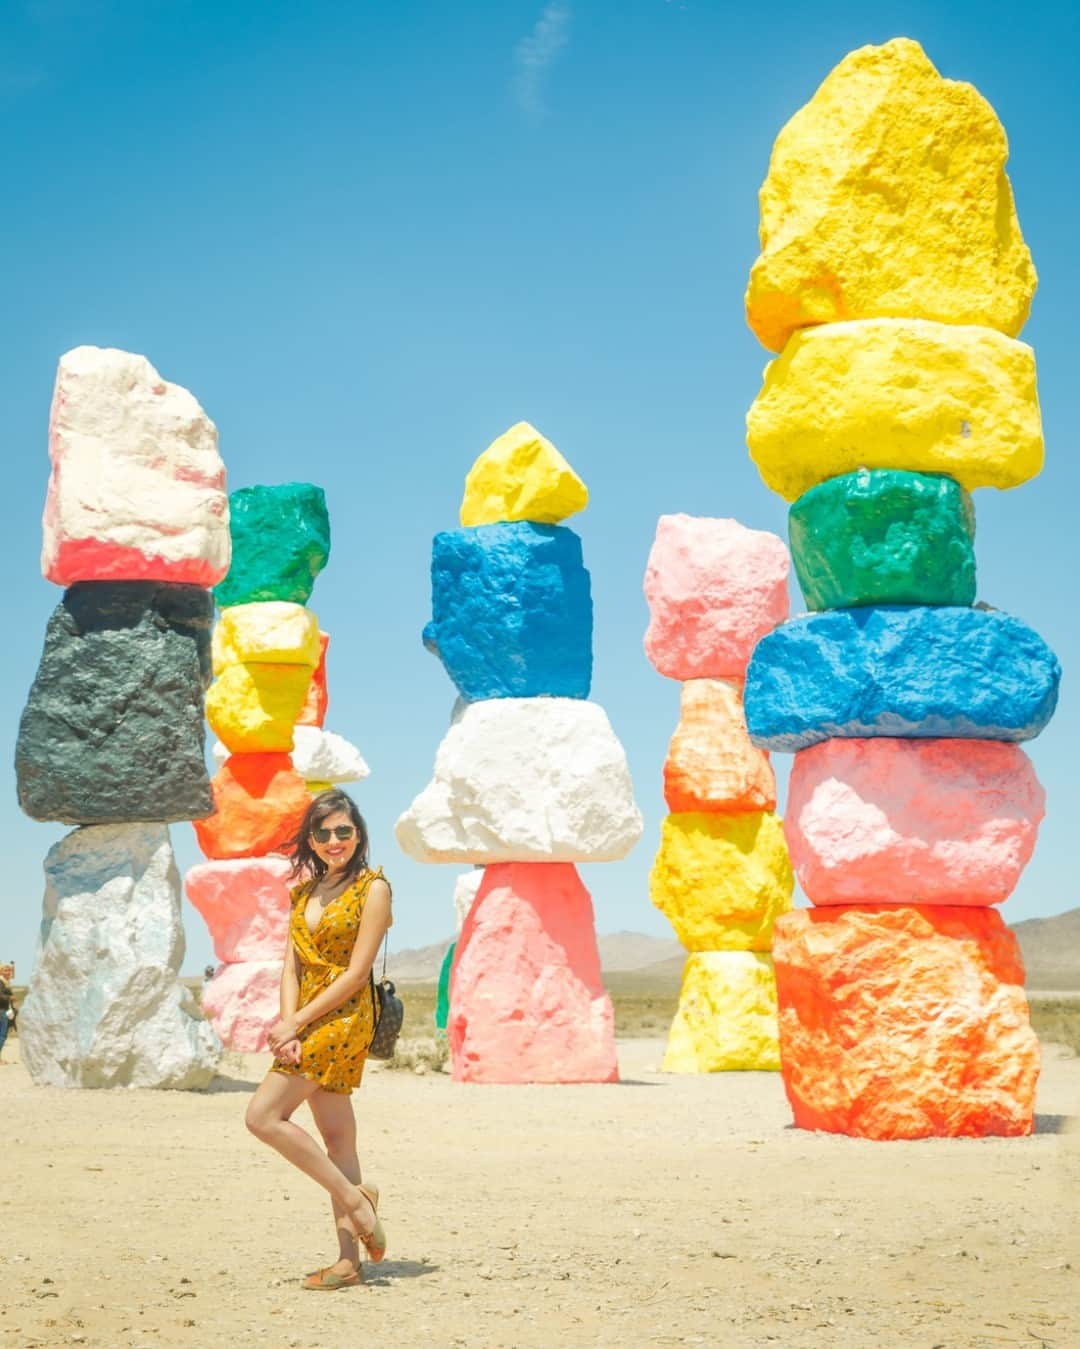 Visit The USAのインスタグラム：「Located just 25 minutes from the Las Vegas Strip, The Seven Magic Mountains in Clark County, Nevada, almost feel like a neon-colored mirage in the desert. This free attraction is a must-add for your Vegas vacation photo dump! Oh, and K-Pop fans… Saw Bae Suzy in Doona! visited this magical spot 👀  #VisitTheUSA #SevenMagicMountains #Nevada  #LasVegasTrip #KPoP #Doona!」